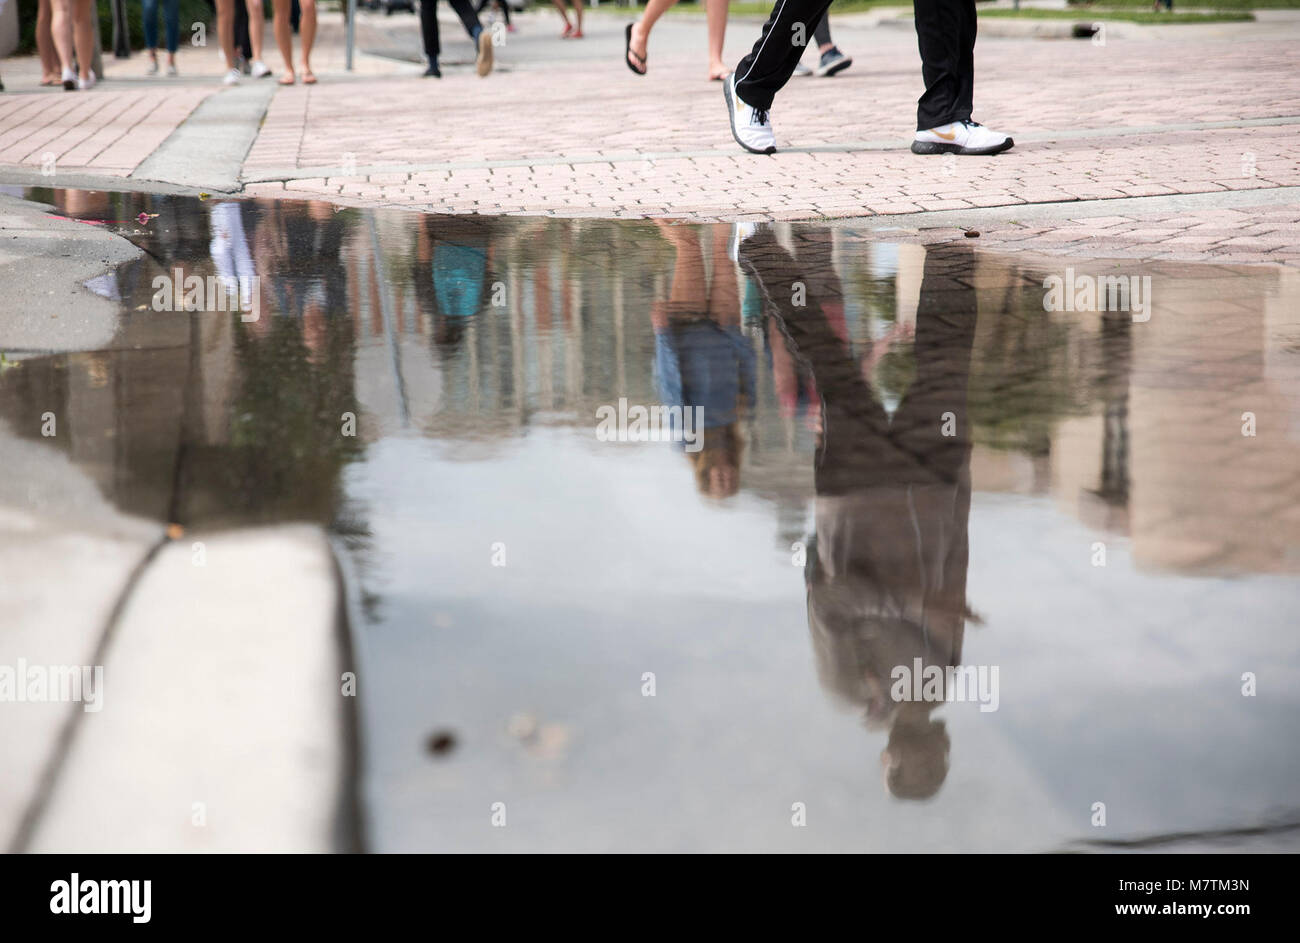 March 12, 2018 - West Palm Beach, Florida, U.S. - Passers-by on Vallowe Court on the Palm Beach Atlantic University campus walk past their reflections in a puddle after an afternoon shower in West Palm Beach, Fla., on Monday, March 12, 2018. (Credit Image: © Andres Leiva/The Palm Beach Post via ZUMA Wire) Stock Photo